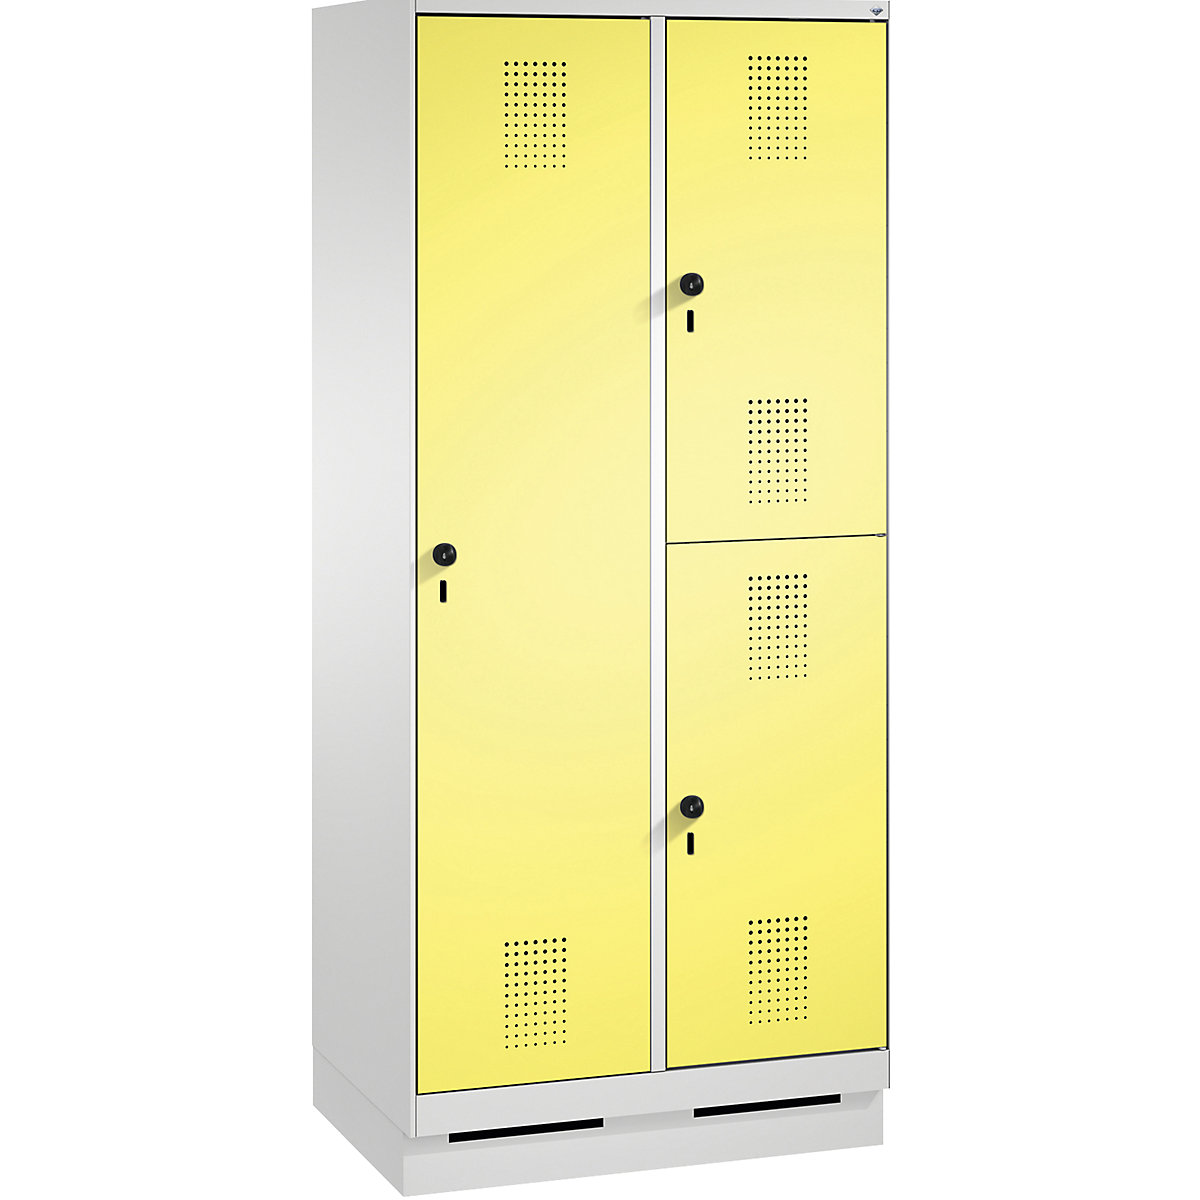 EVOLO combination cupboard, single and double tier – C+P, 2 compartments, 3 doors, compartment width 400 mm, with plinth, light grey / sulphur yellow